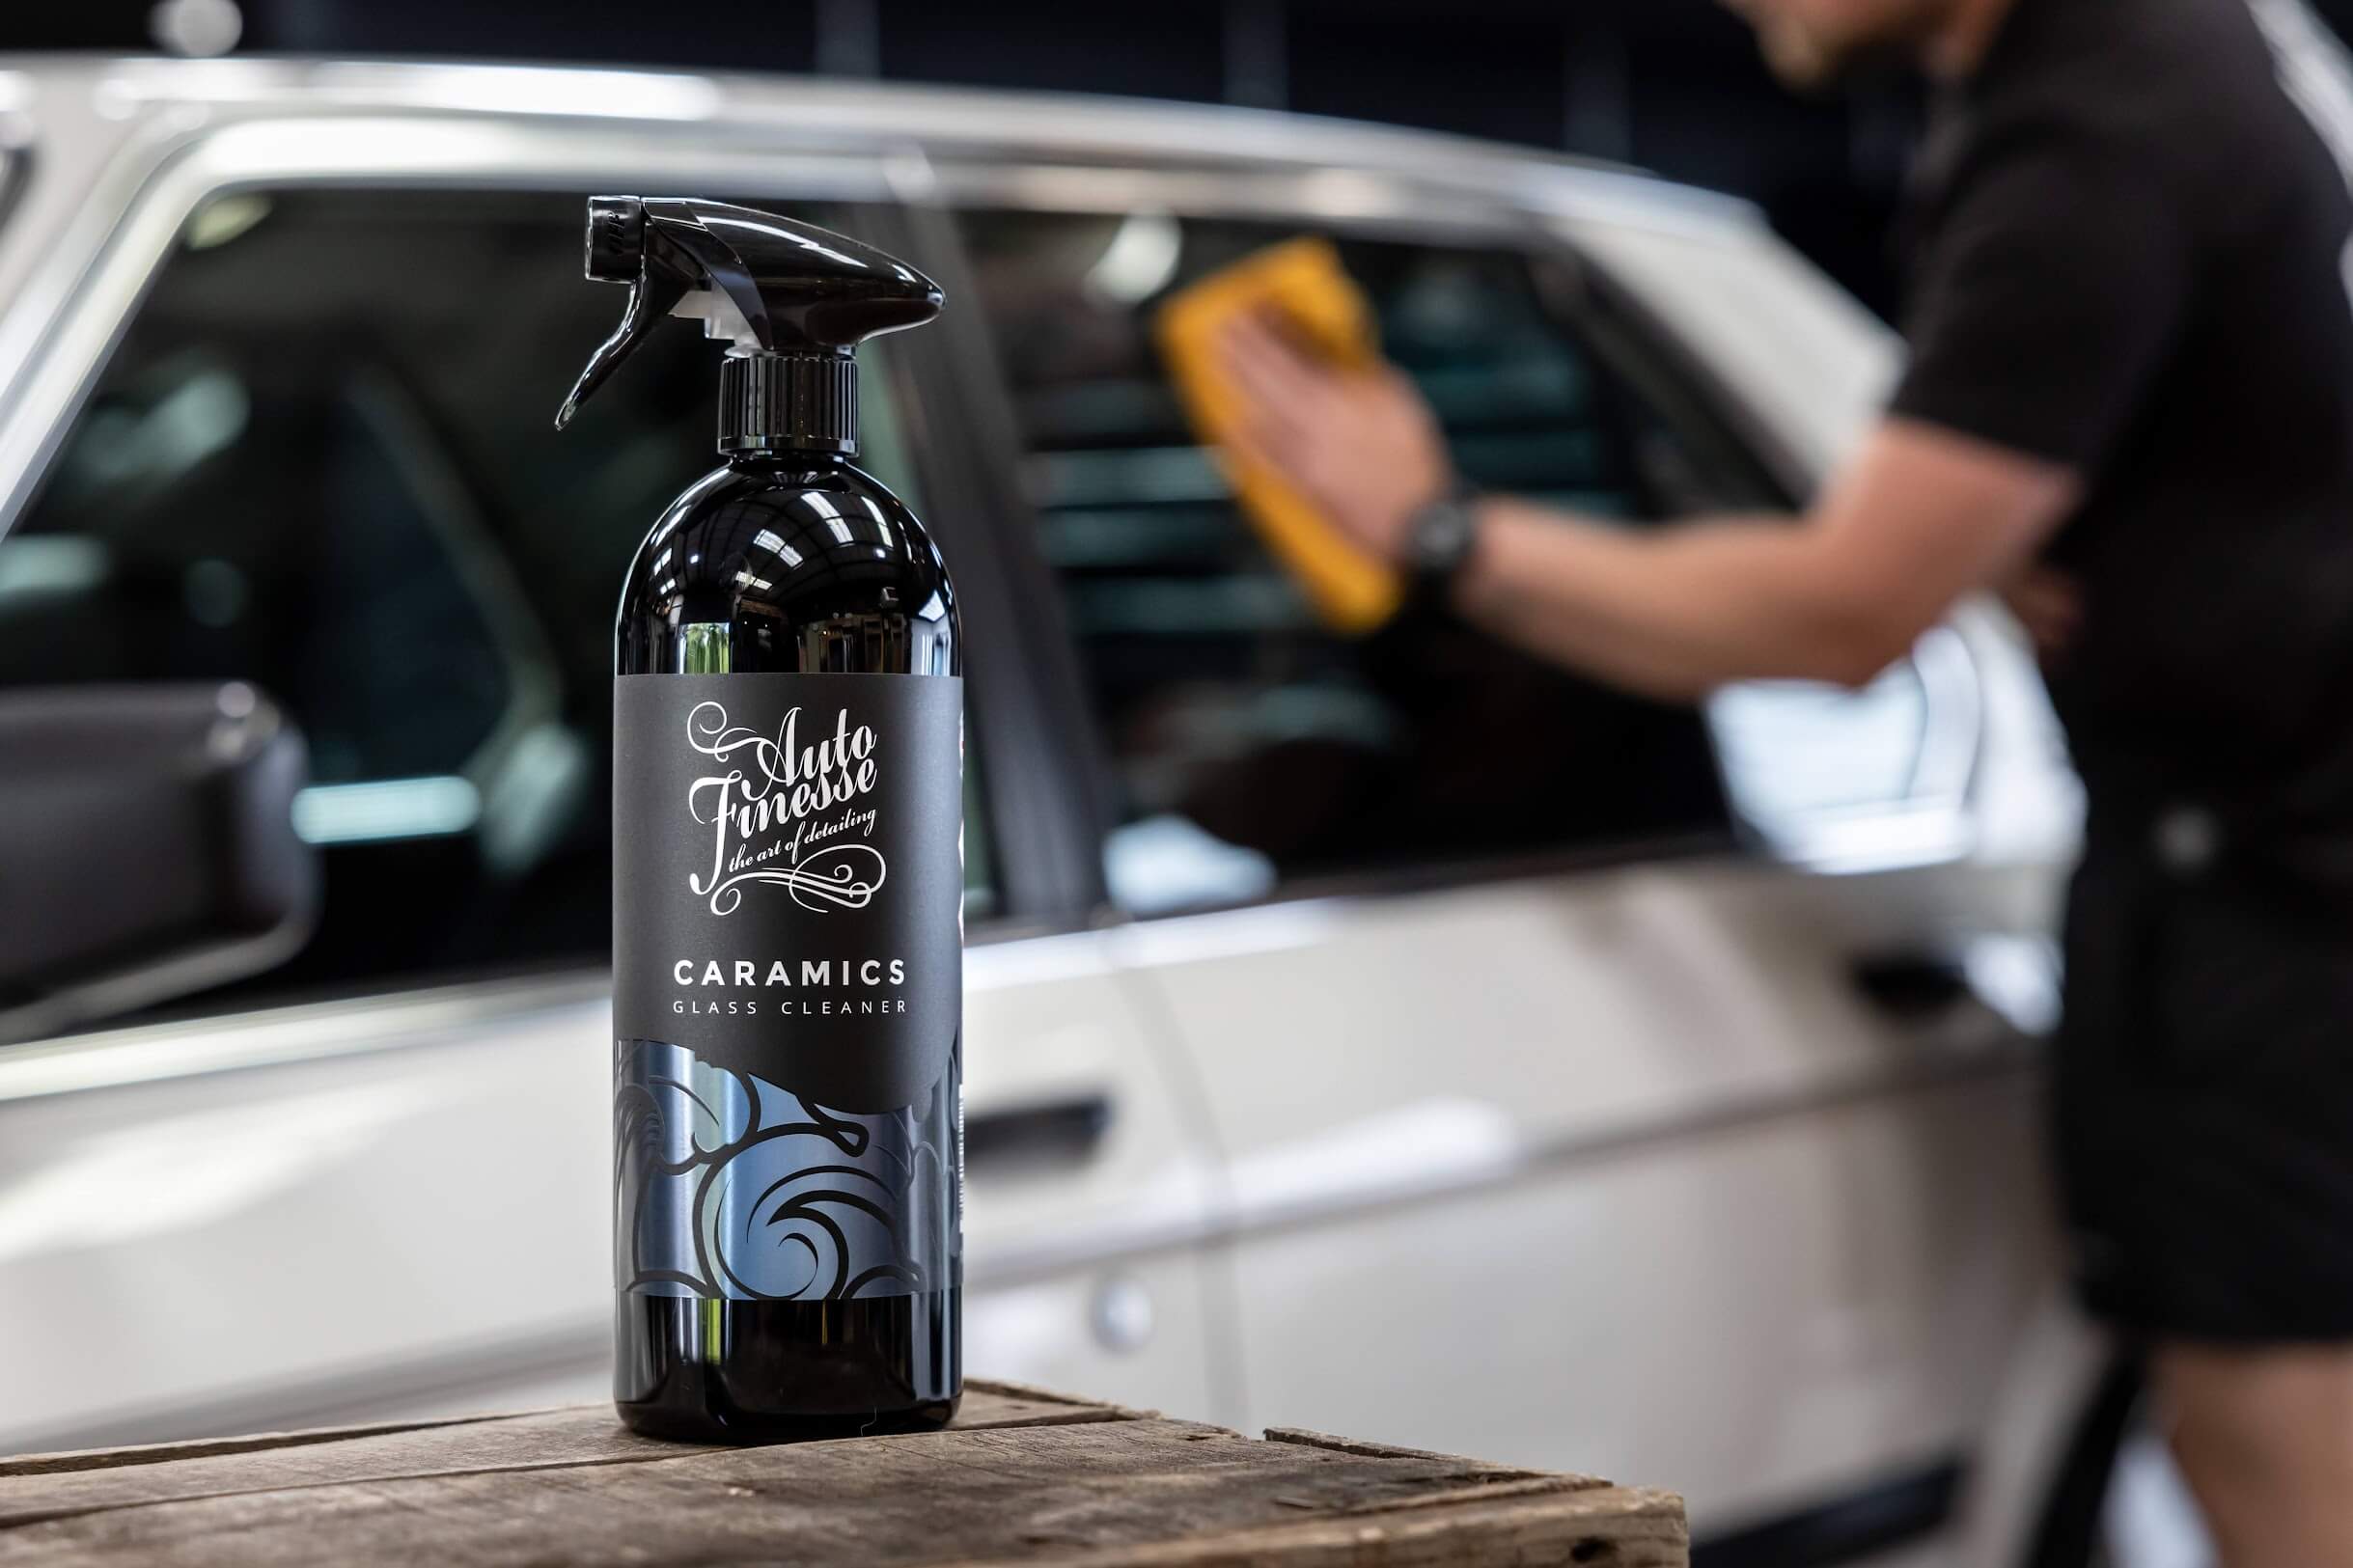 Auto Finesse | Ceramic Infused Glass Cleaner | Caramics